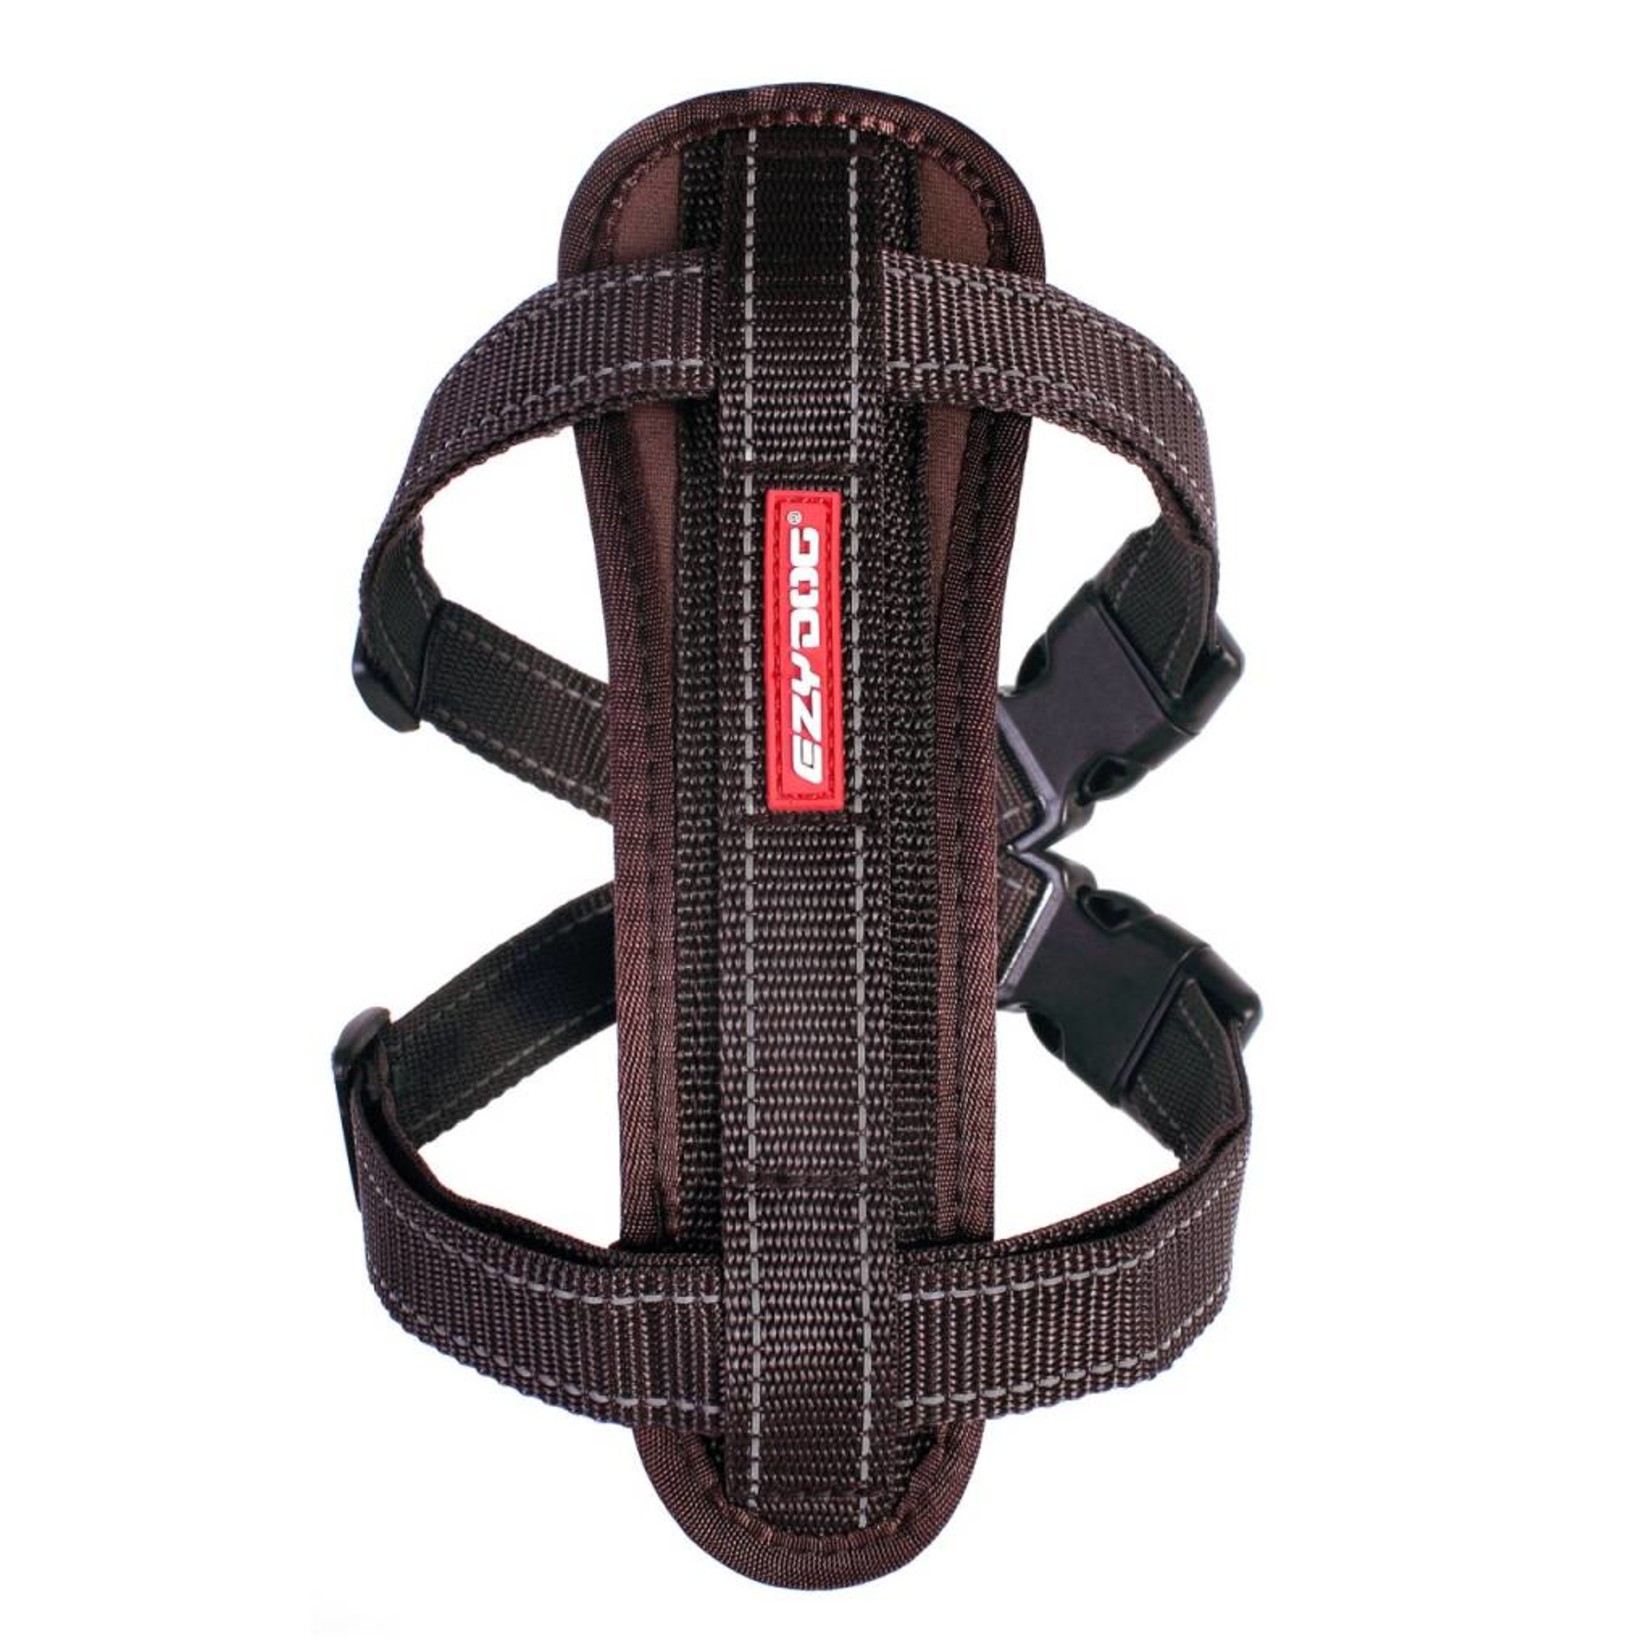 EzyDog Chest Plate Dog Harness with Seat Belt Loop, Chocolate